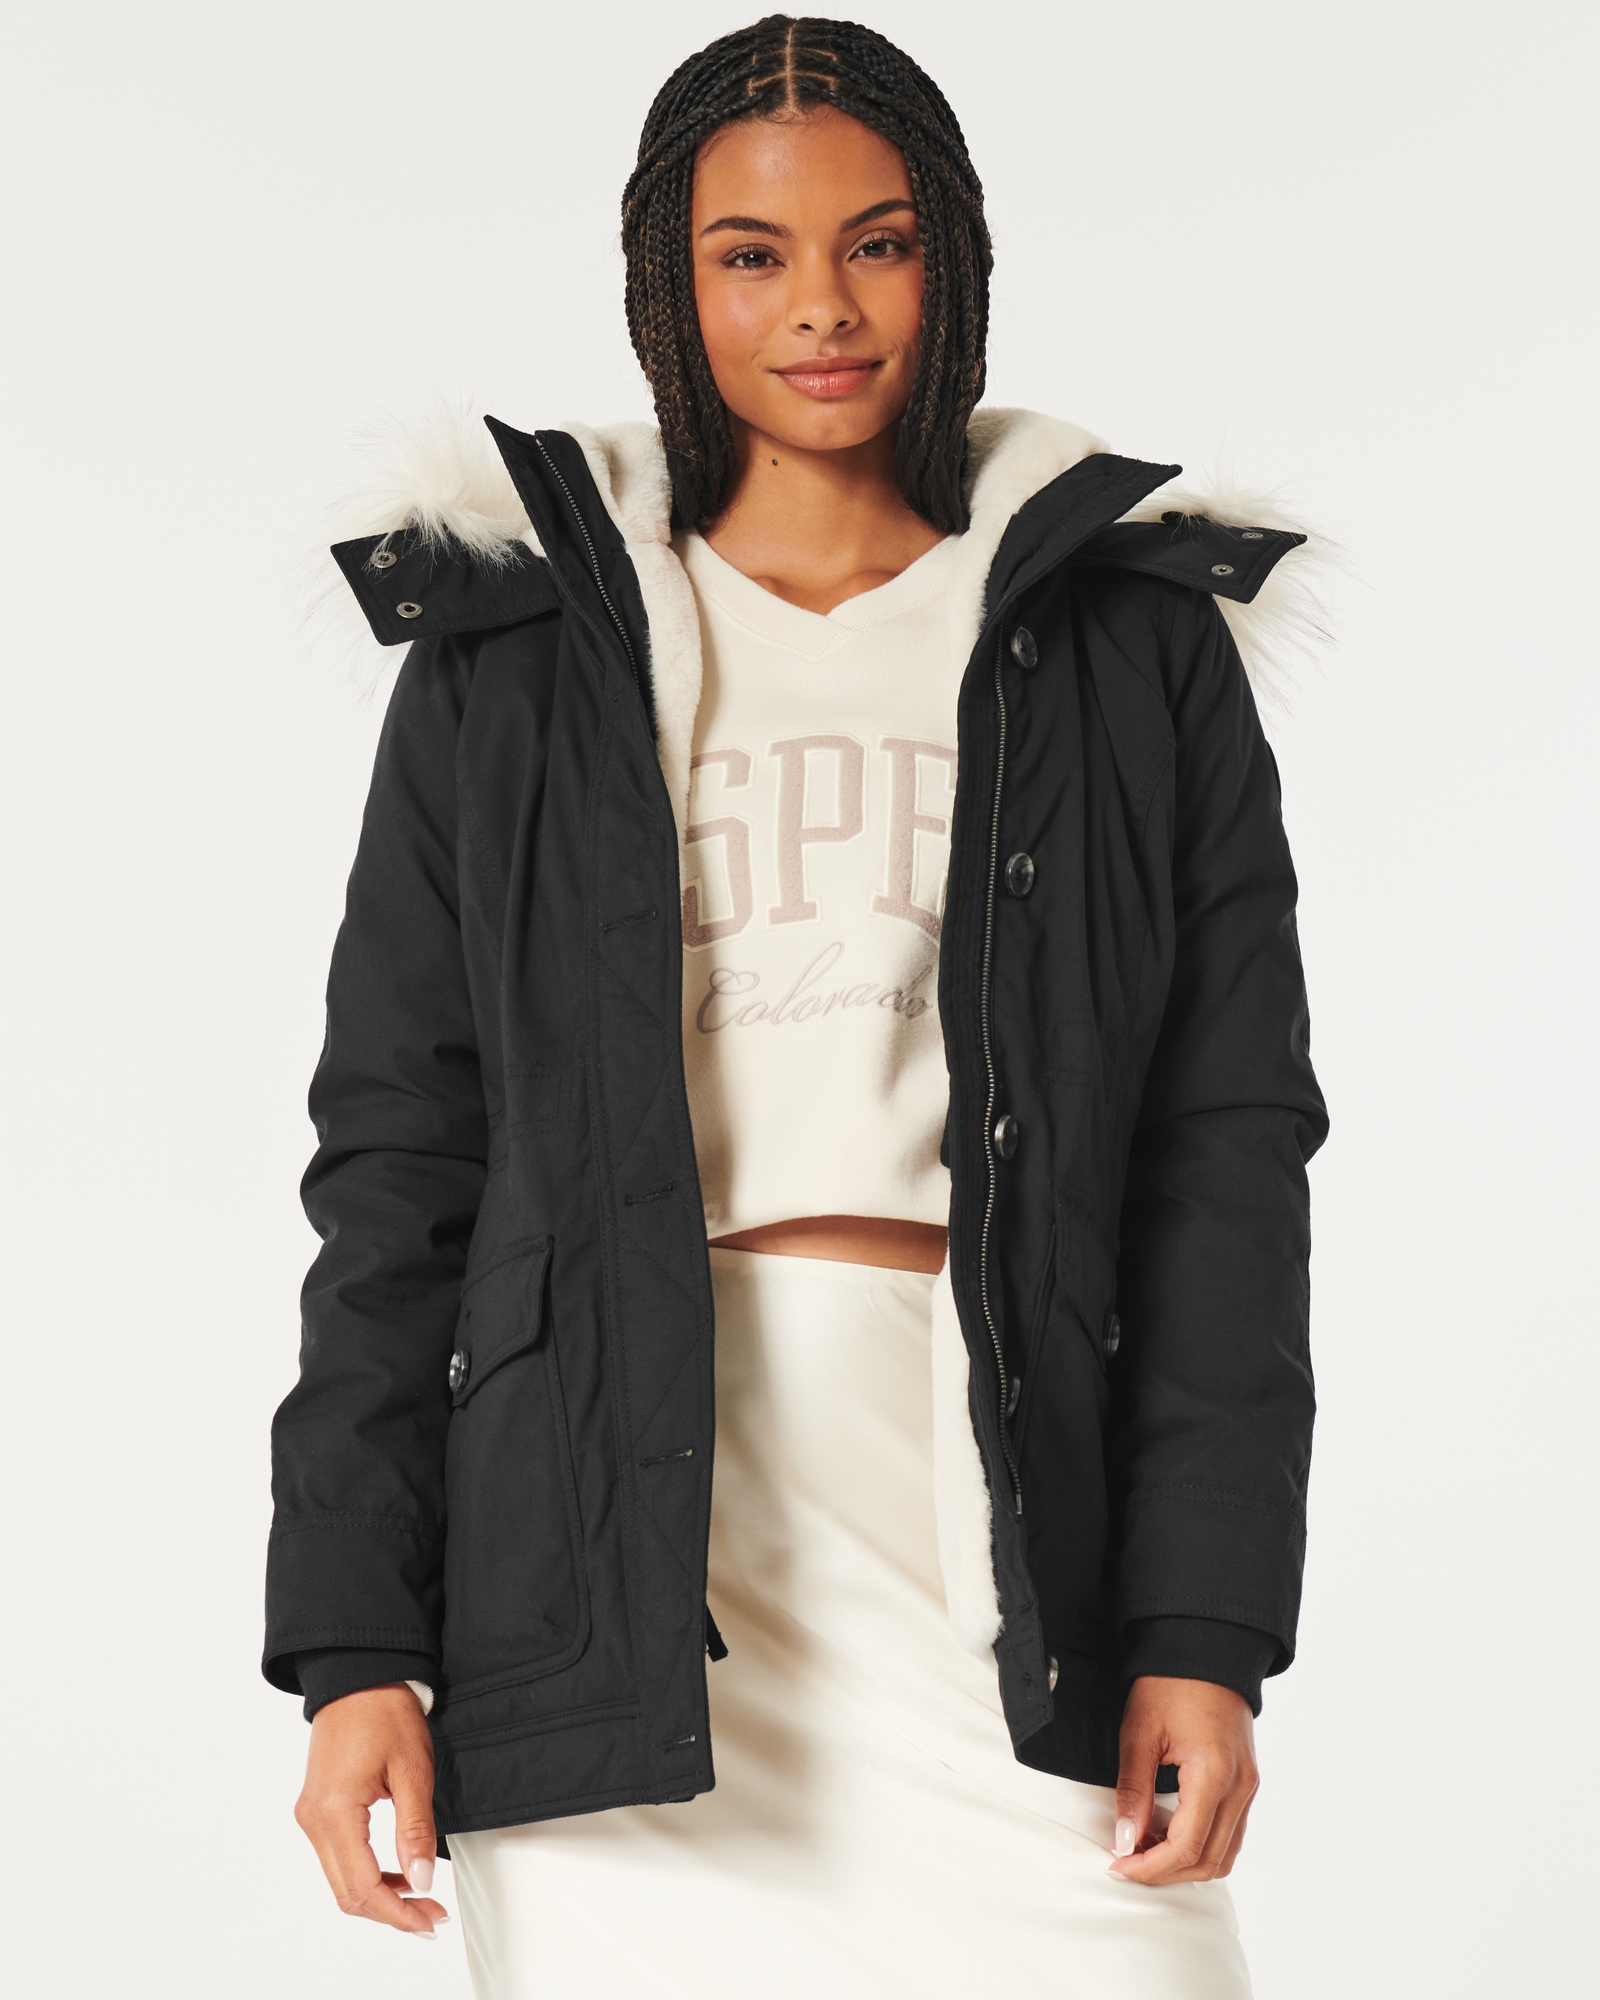 https://img.hollisterco.com/is/image/anf/KIC_344-3520-0006-901_model1.jpg?policy=product-extra-large